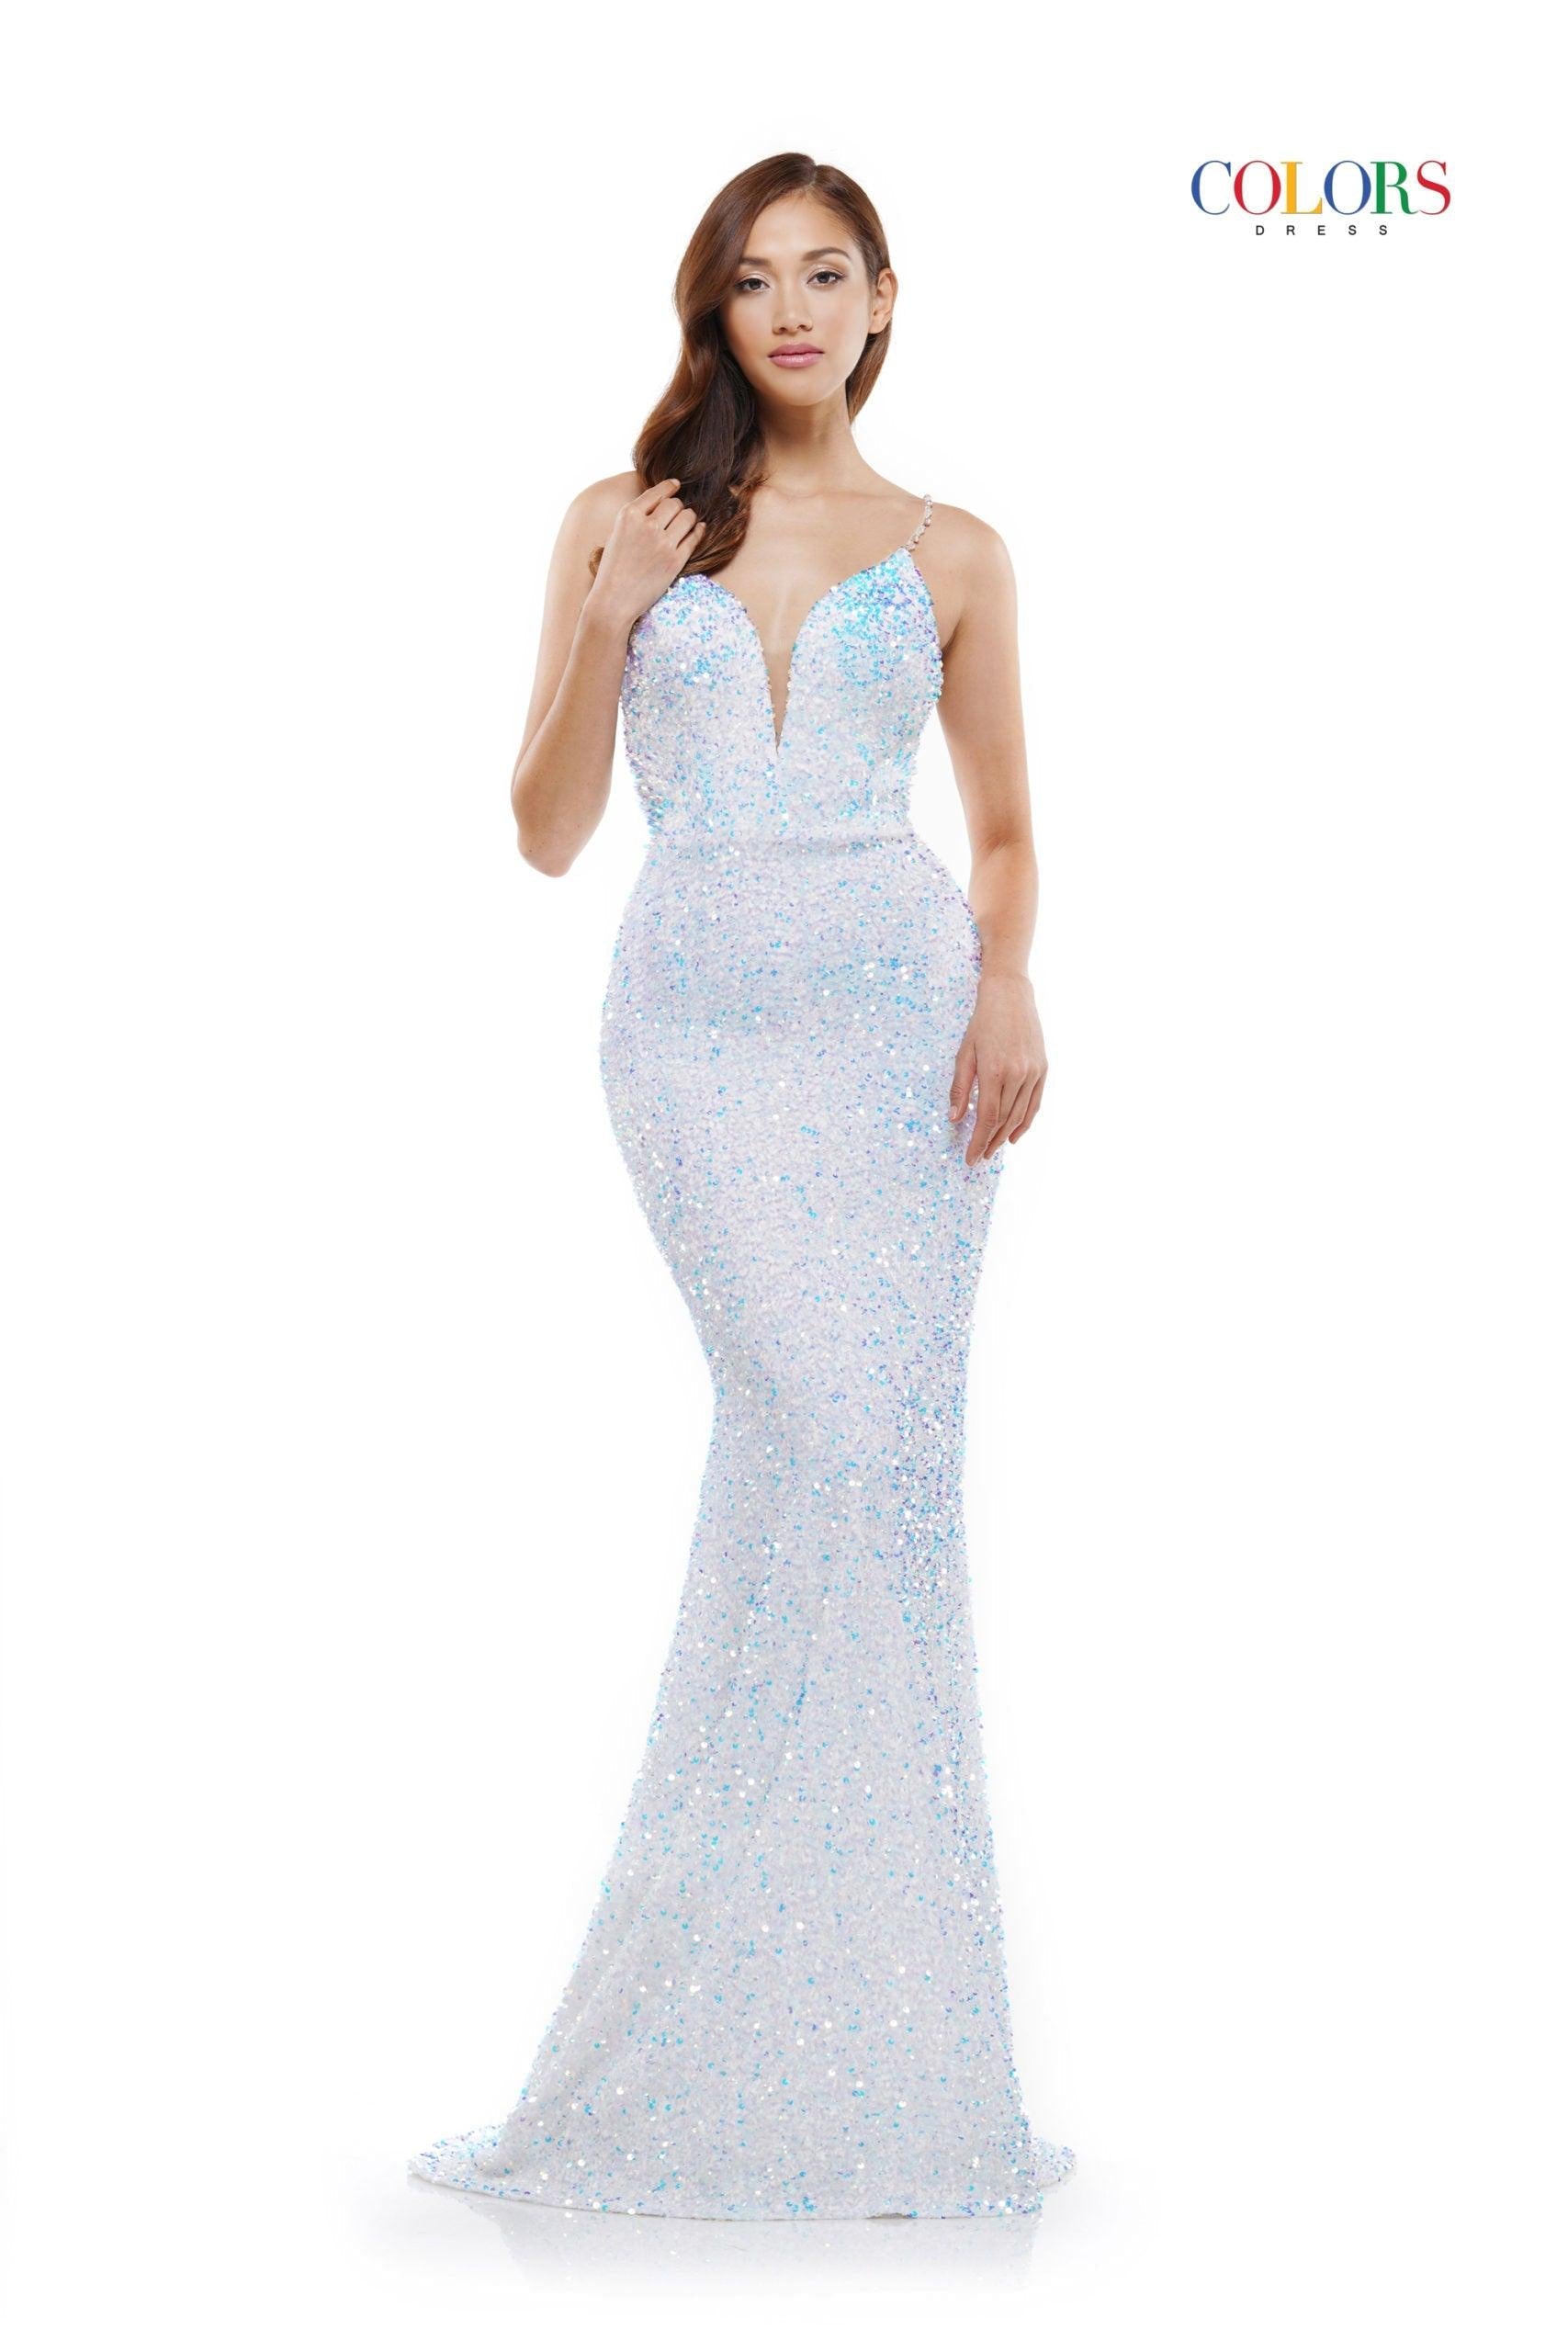 Colors Prom Long Spaghetti Strap Formal Dress 2459 - The Dress Outlet